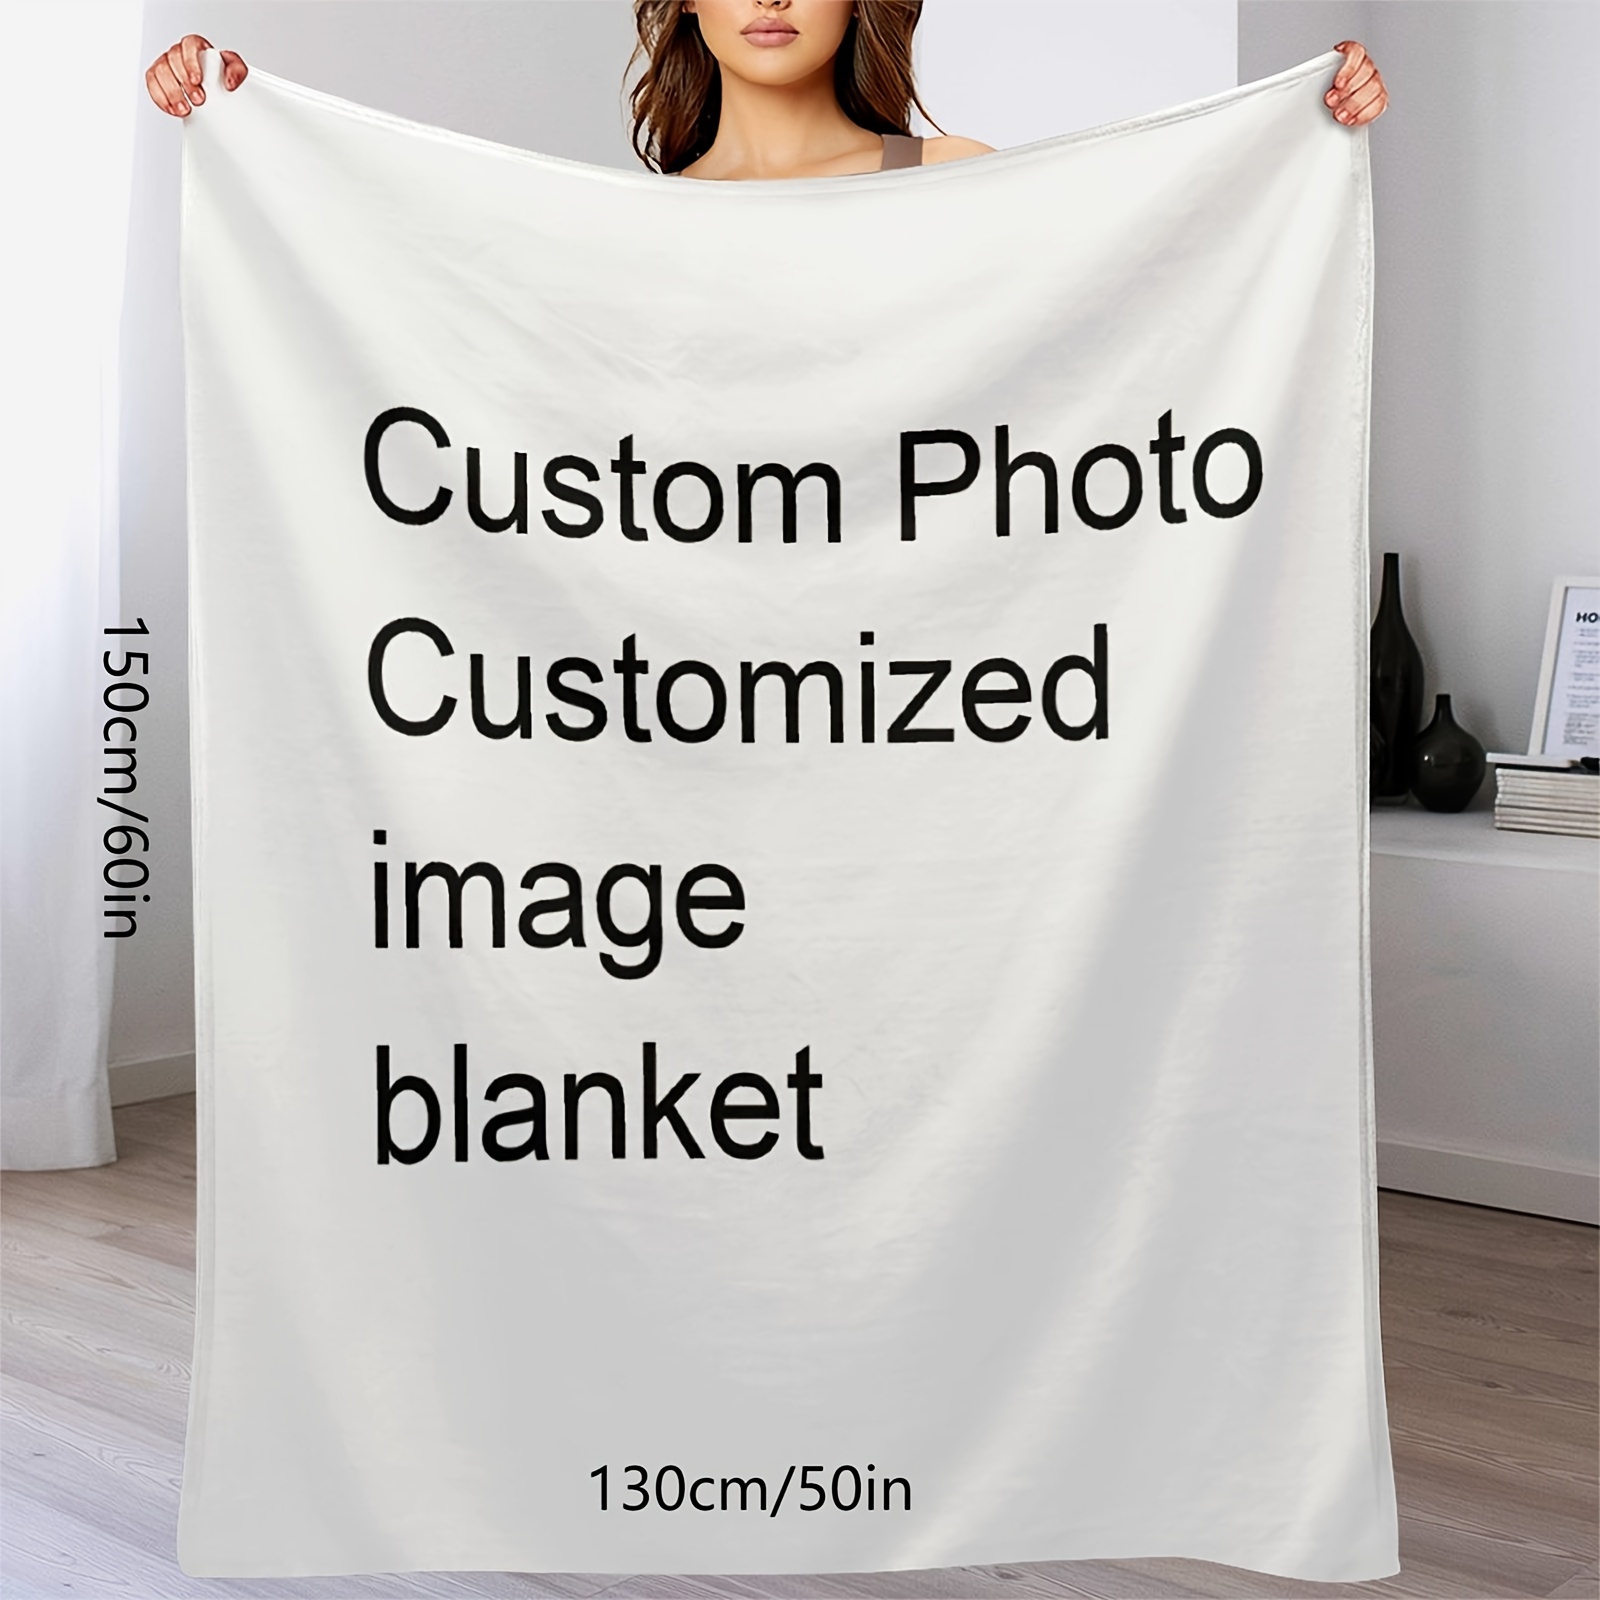 

Custom Photo Throw Blanket Customized Pictures Blanket Personalized Blanket For Family Wedding Birthday Christmas Valentine's Day Gifts For Women Him Her 130x150m/50x60in